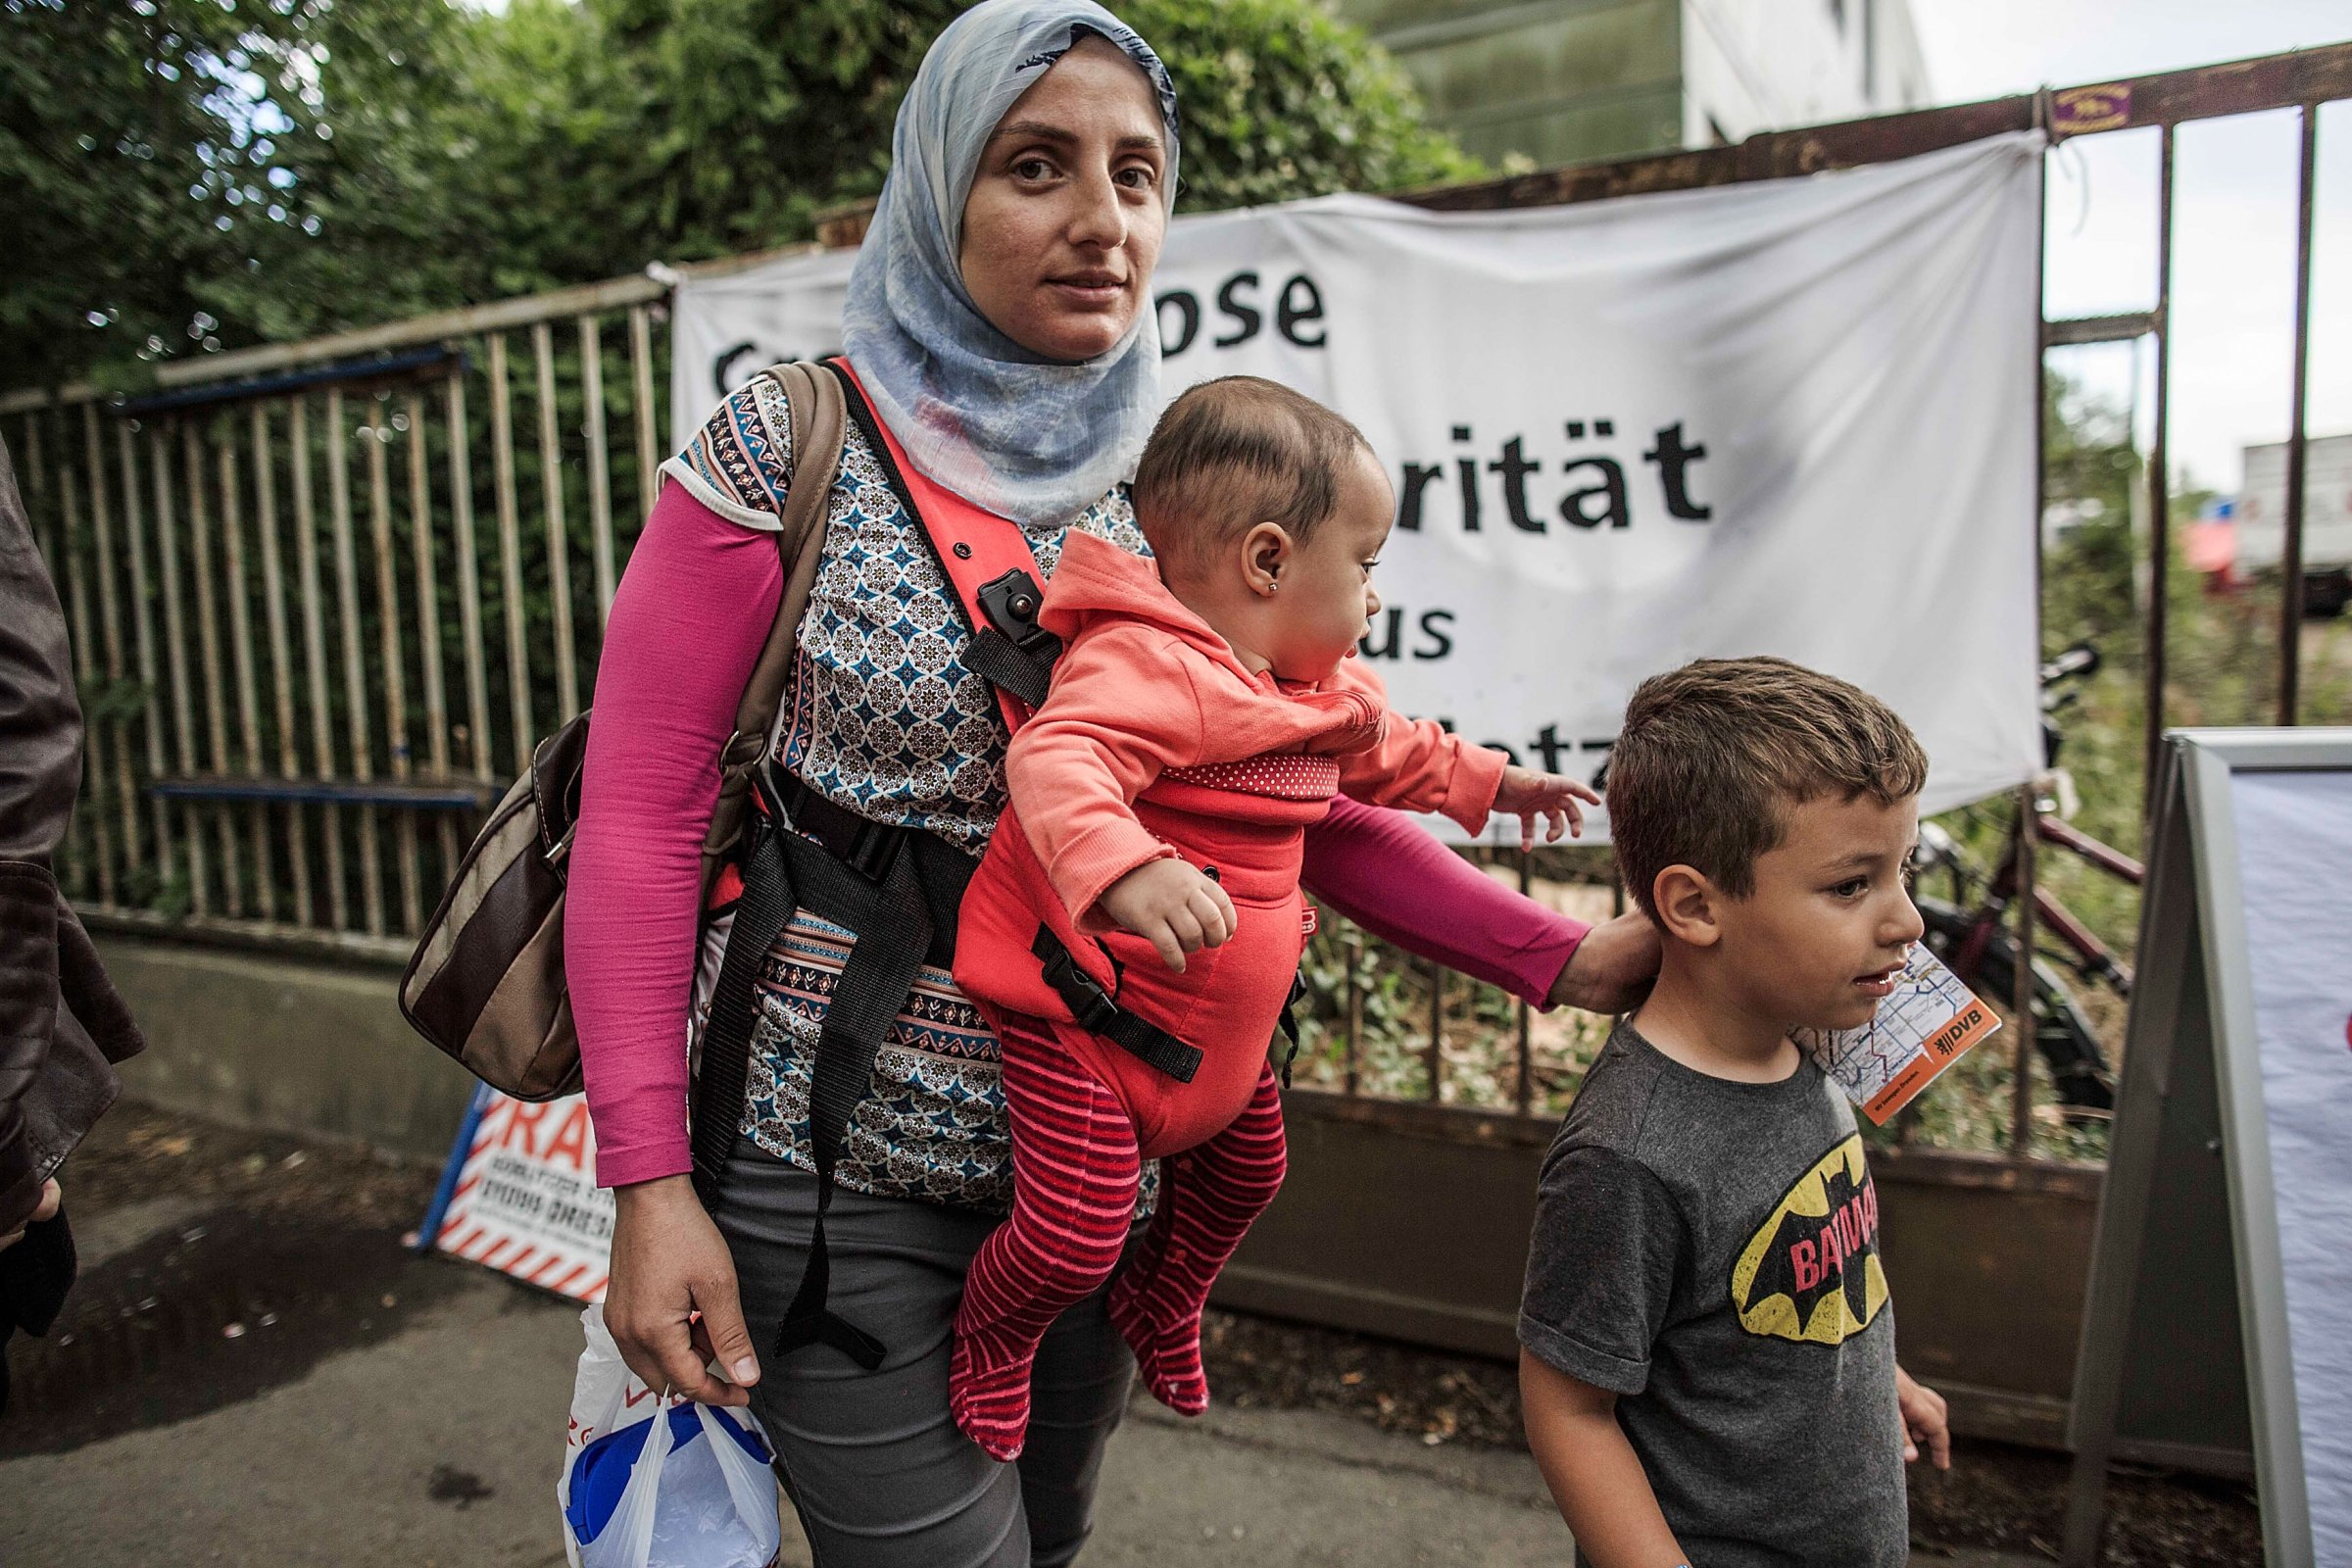 Refugees Arrive In Dresden Amidst Protests